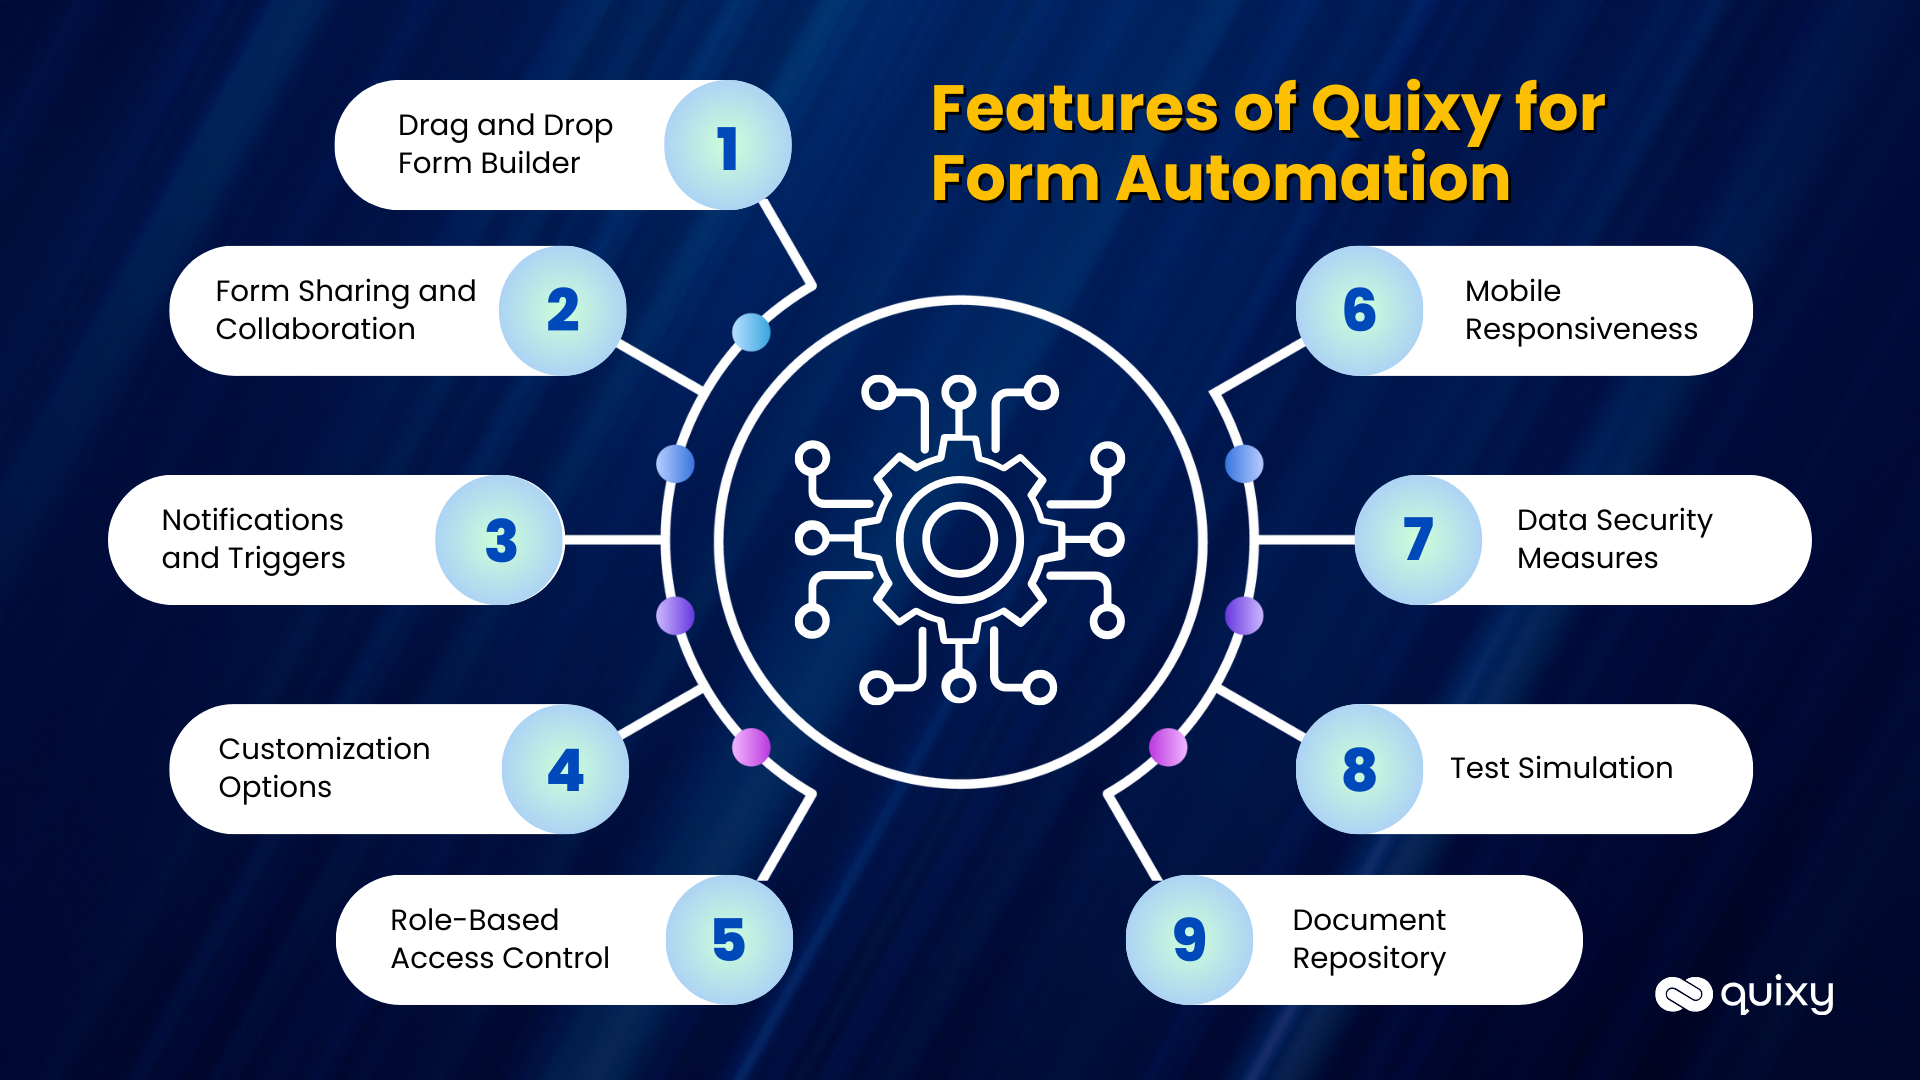 Features of Quixy for Form Automation